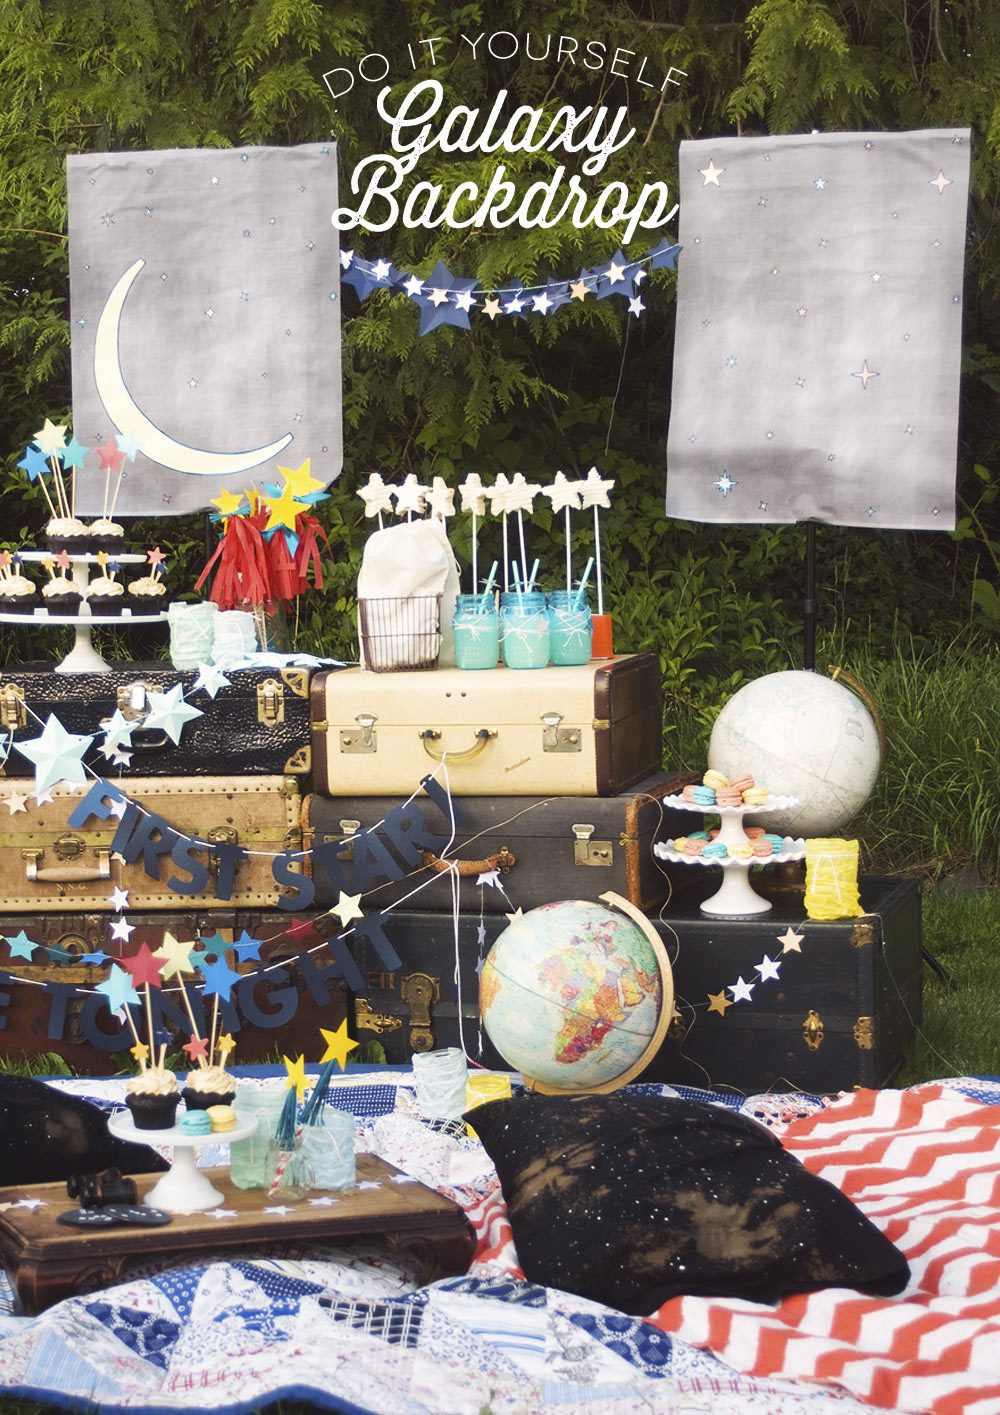 Star Gazing Party FREE Printable Invitation and Craft Tutorials